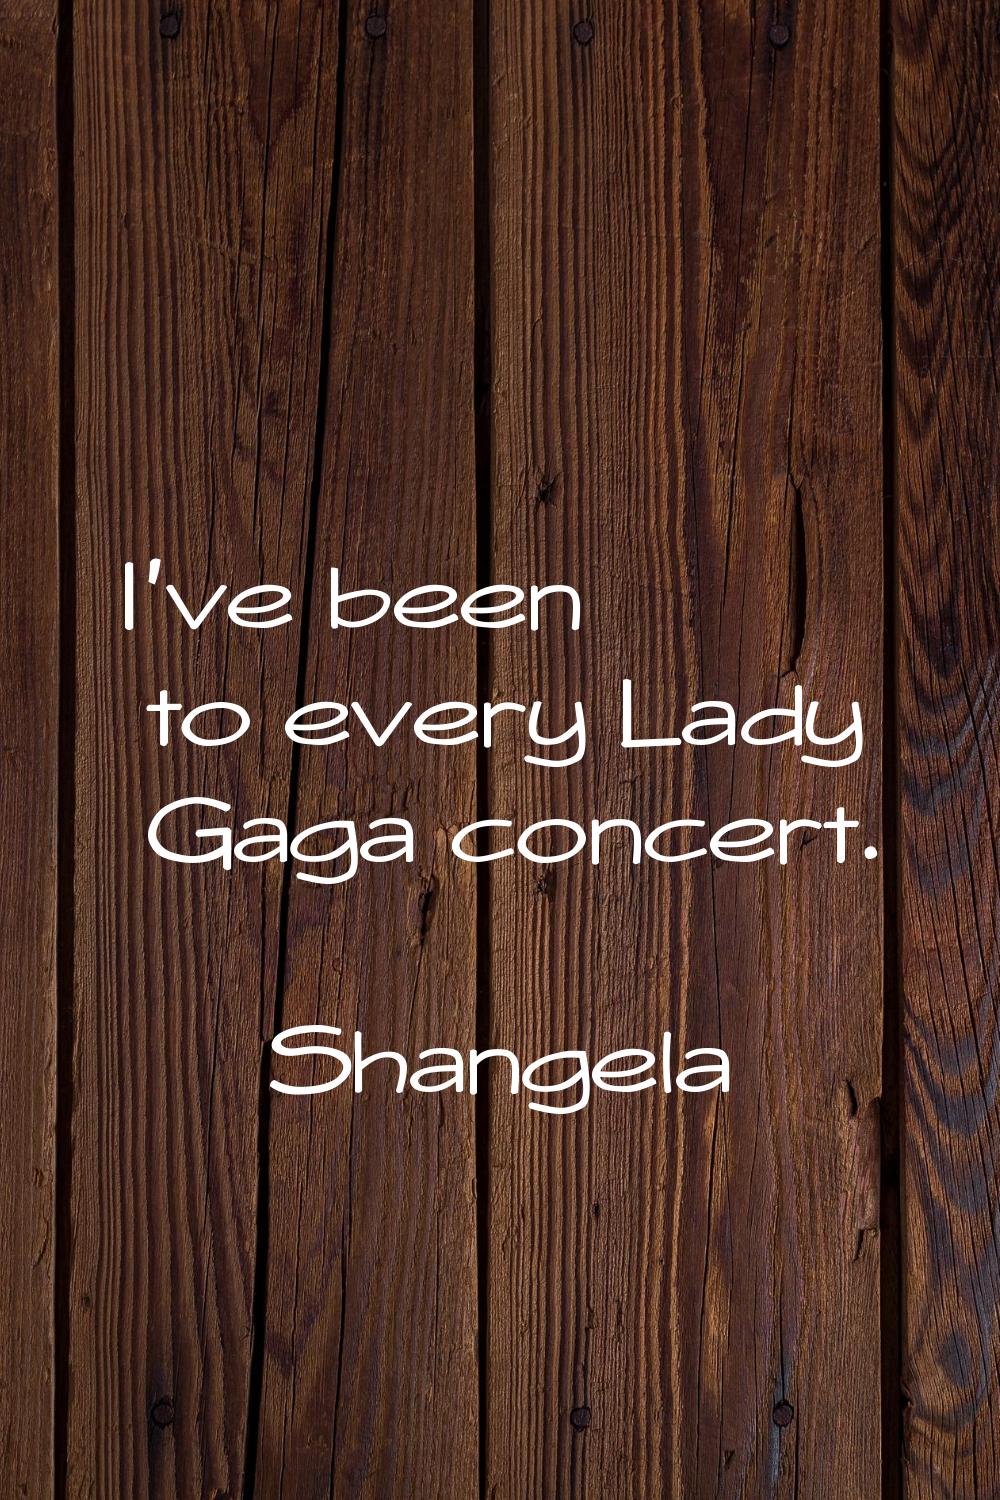 I've been to every Lady Gaga concert.